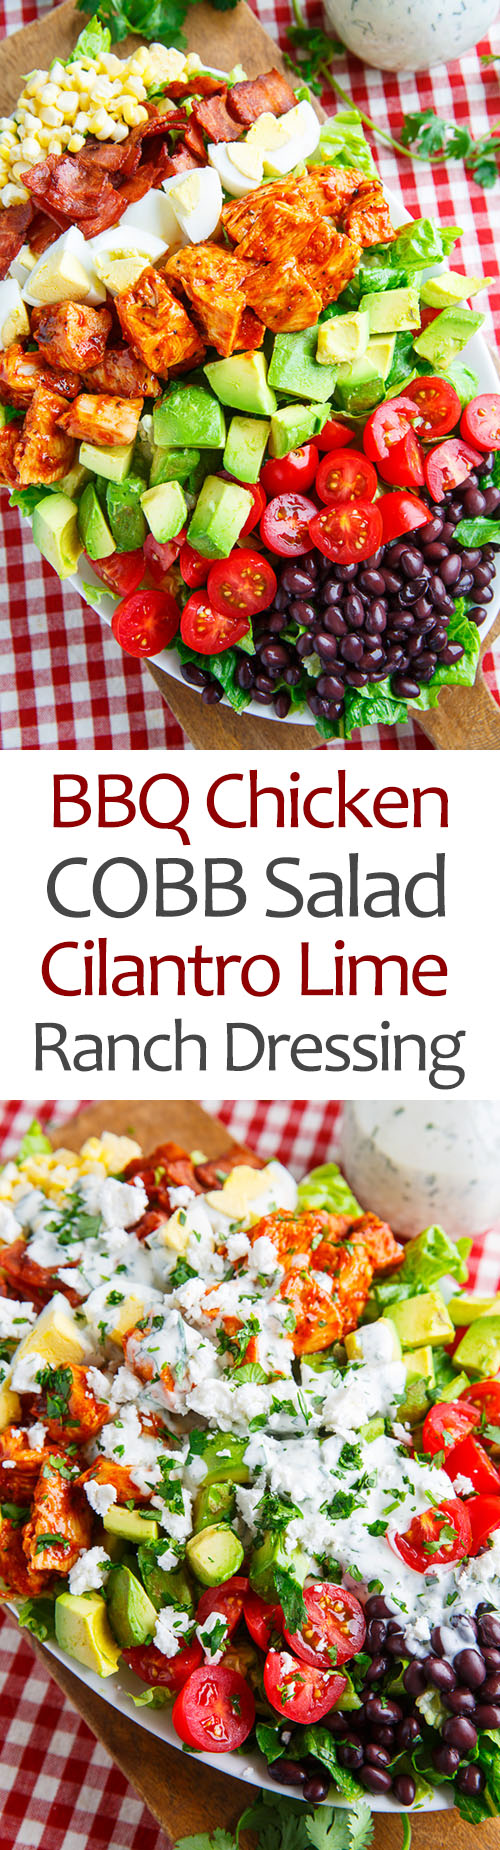 BBQ Chicken COBB Salad with Cilantro Lime Ranch Dressing